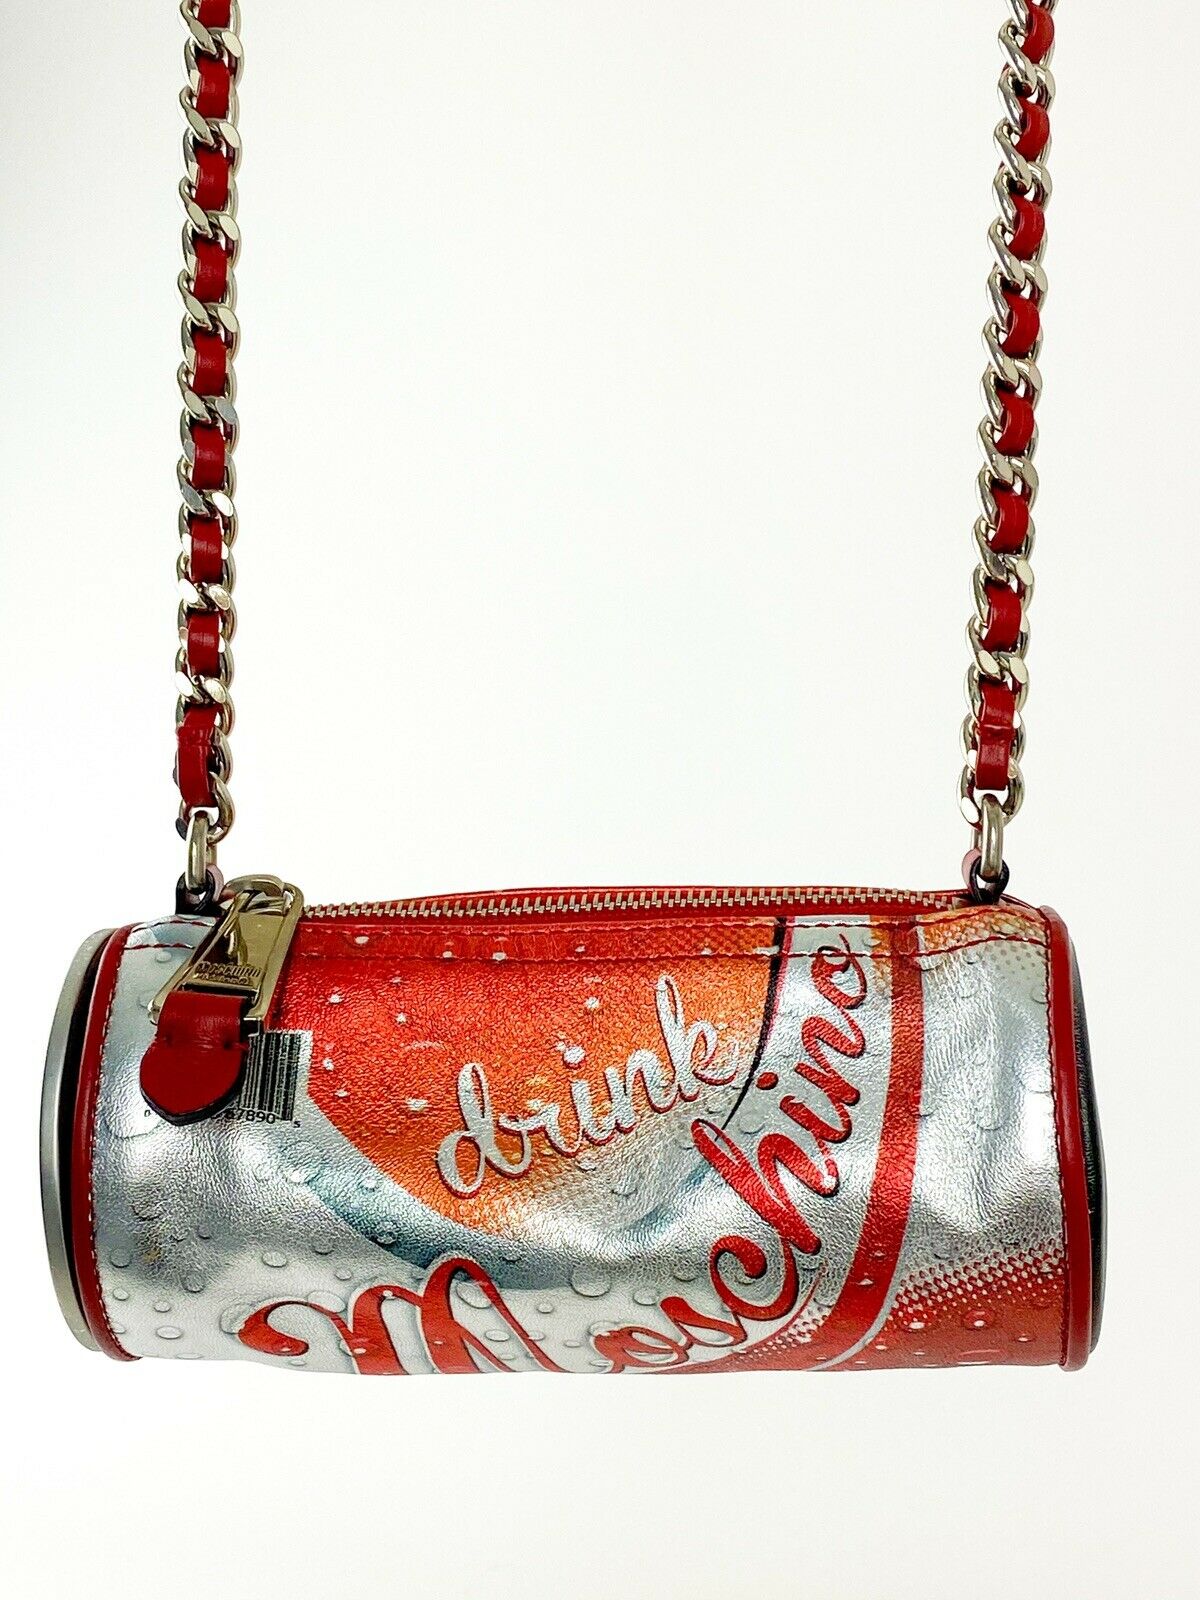 【SOLD OUT】Moschino Milano  Coca Cola Bottle Bag